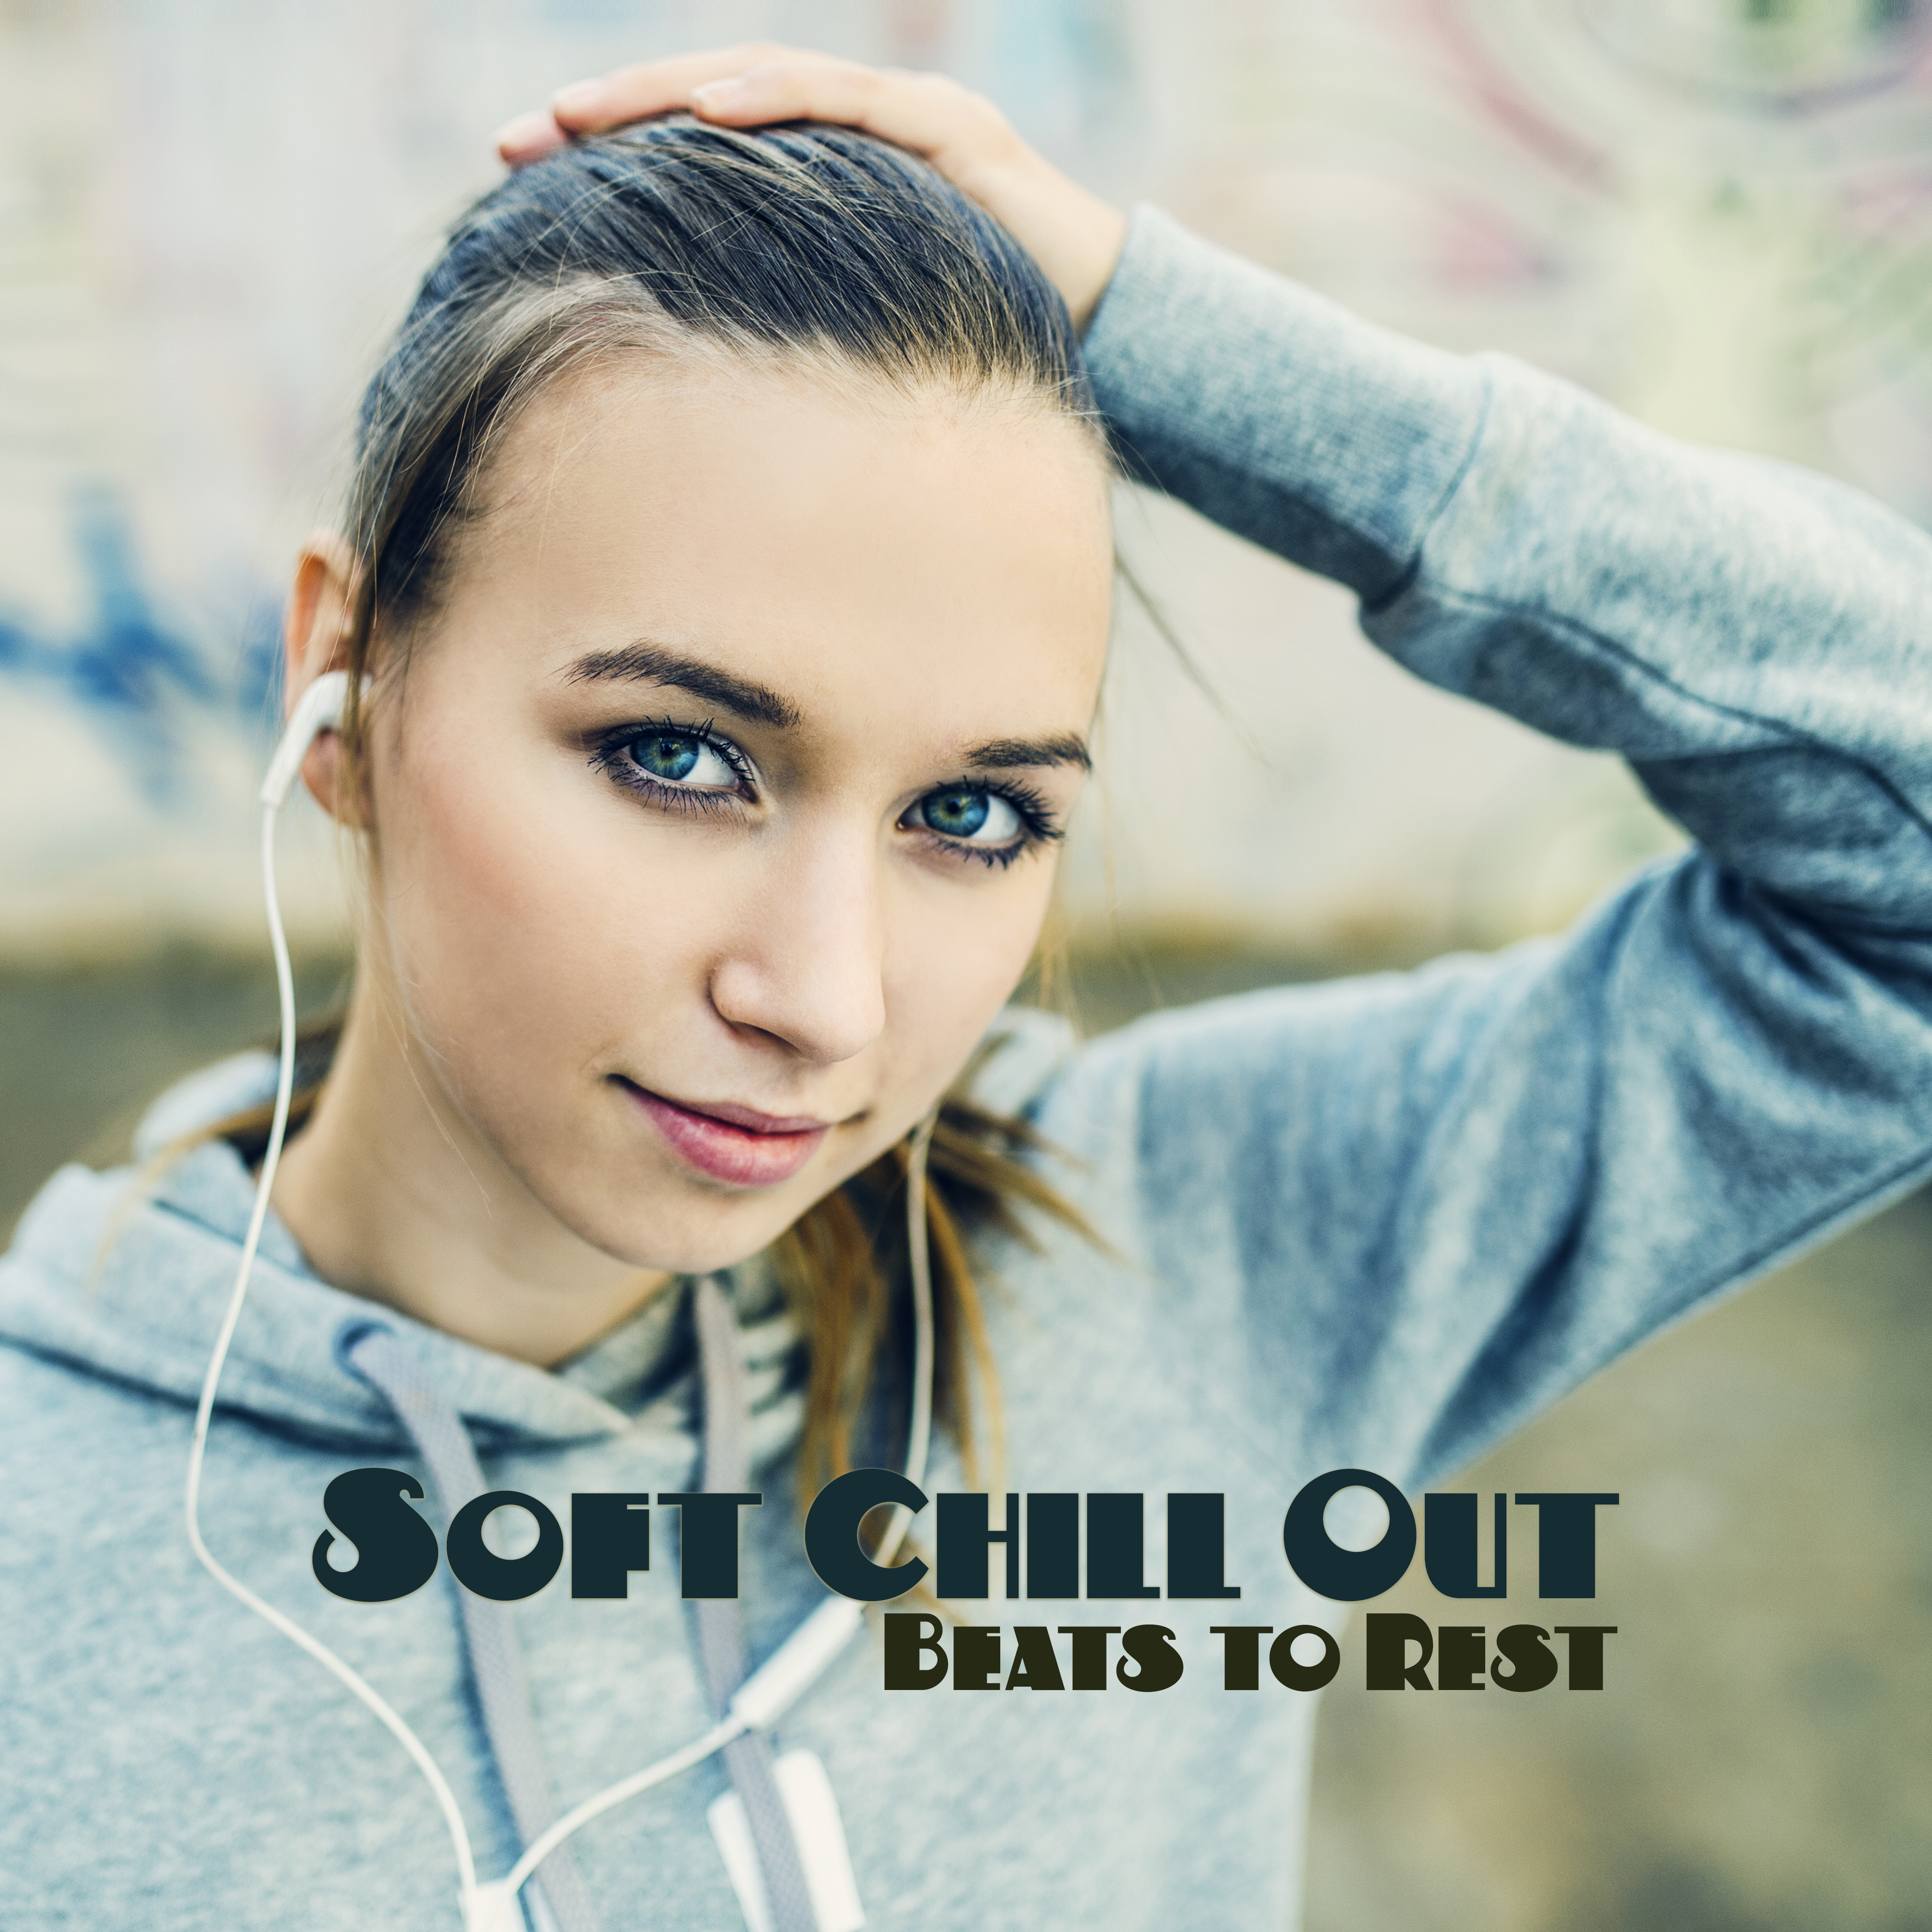 Soft Chill Out Beats to Rest  Calm Down  Relax, Peaceful Melodies, Chill Out Relaxation